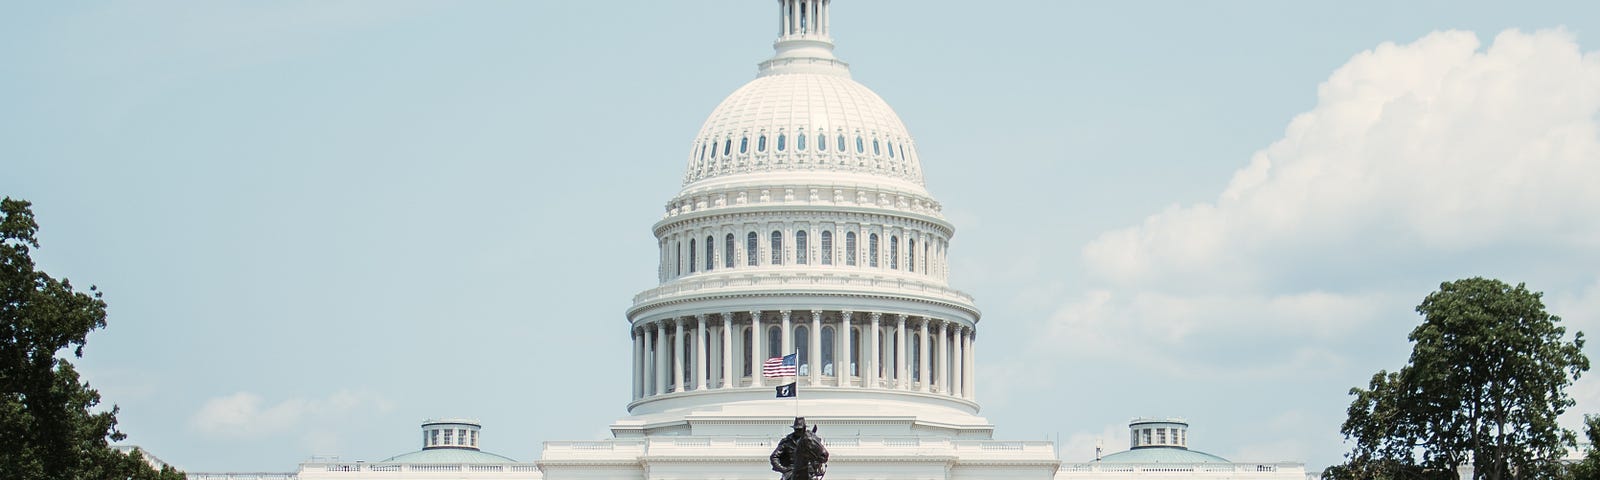 Photo of the U.S. Capitol with the reflecting pool in the foreground.